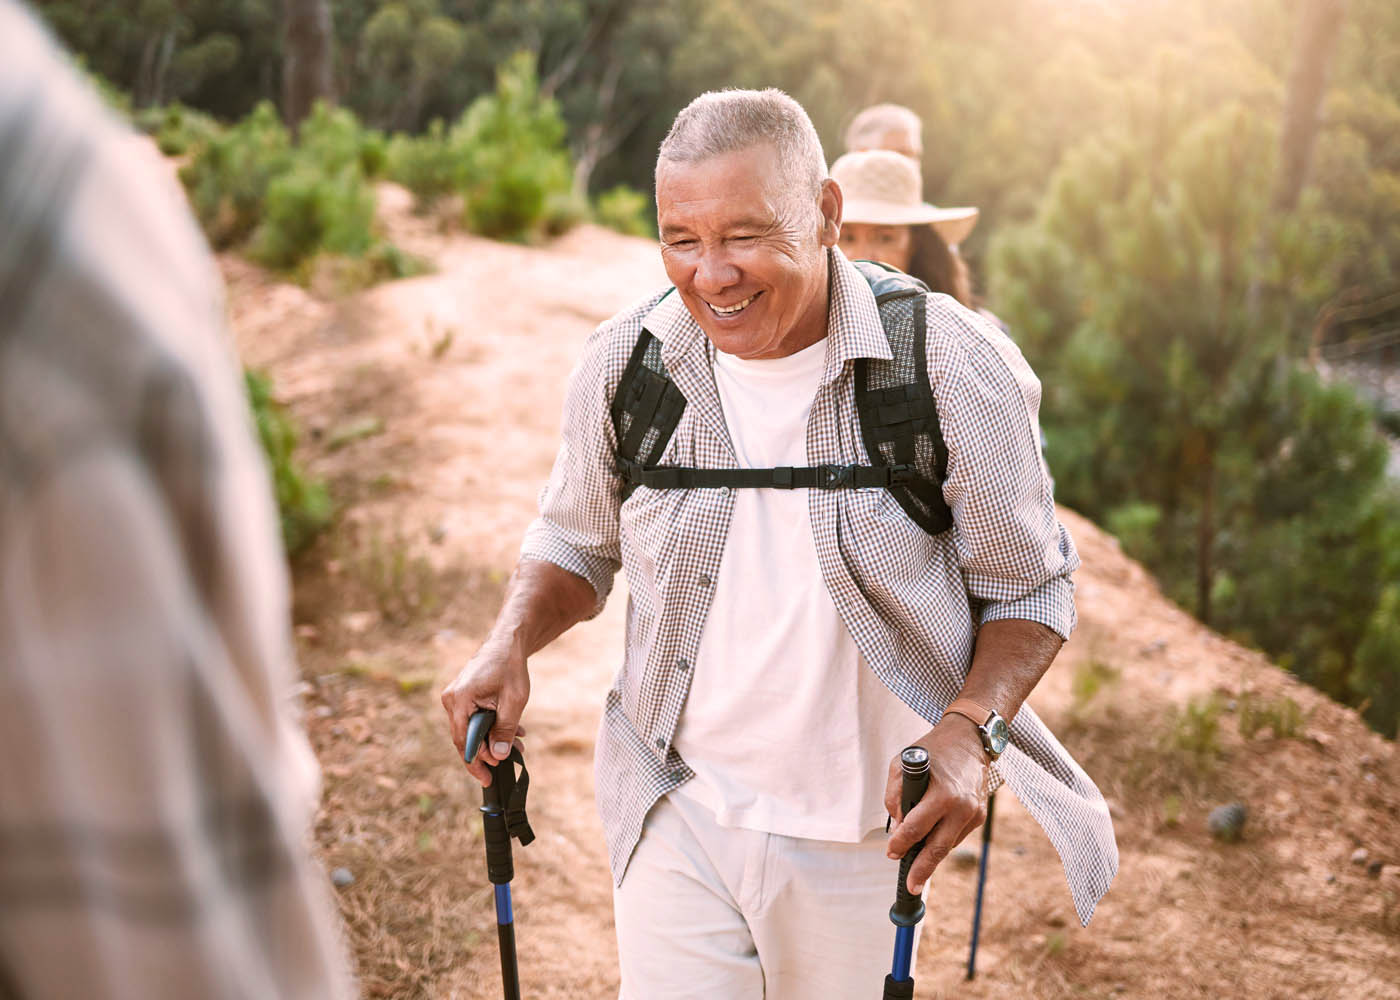 A man hiking with his wife free of pain after visiting Light Lounge's chronic pain treatment center in Southlake, TX.